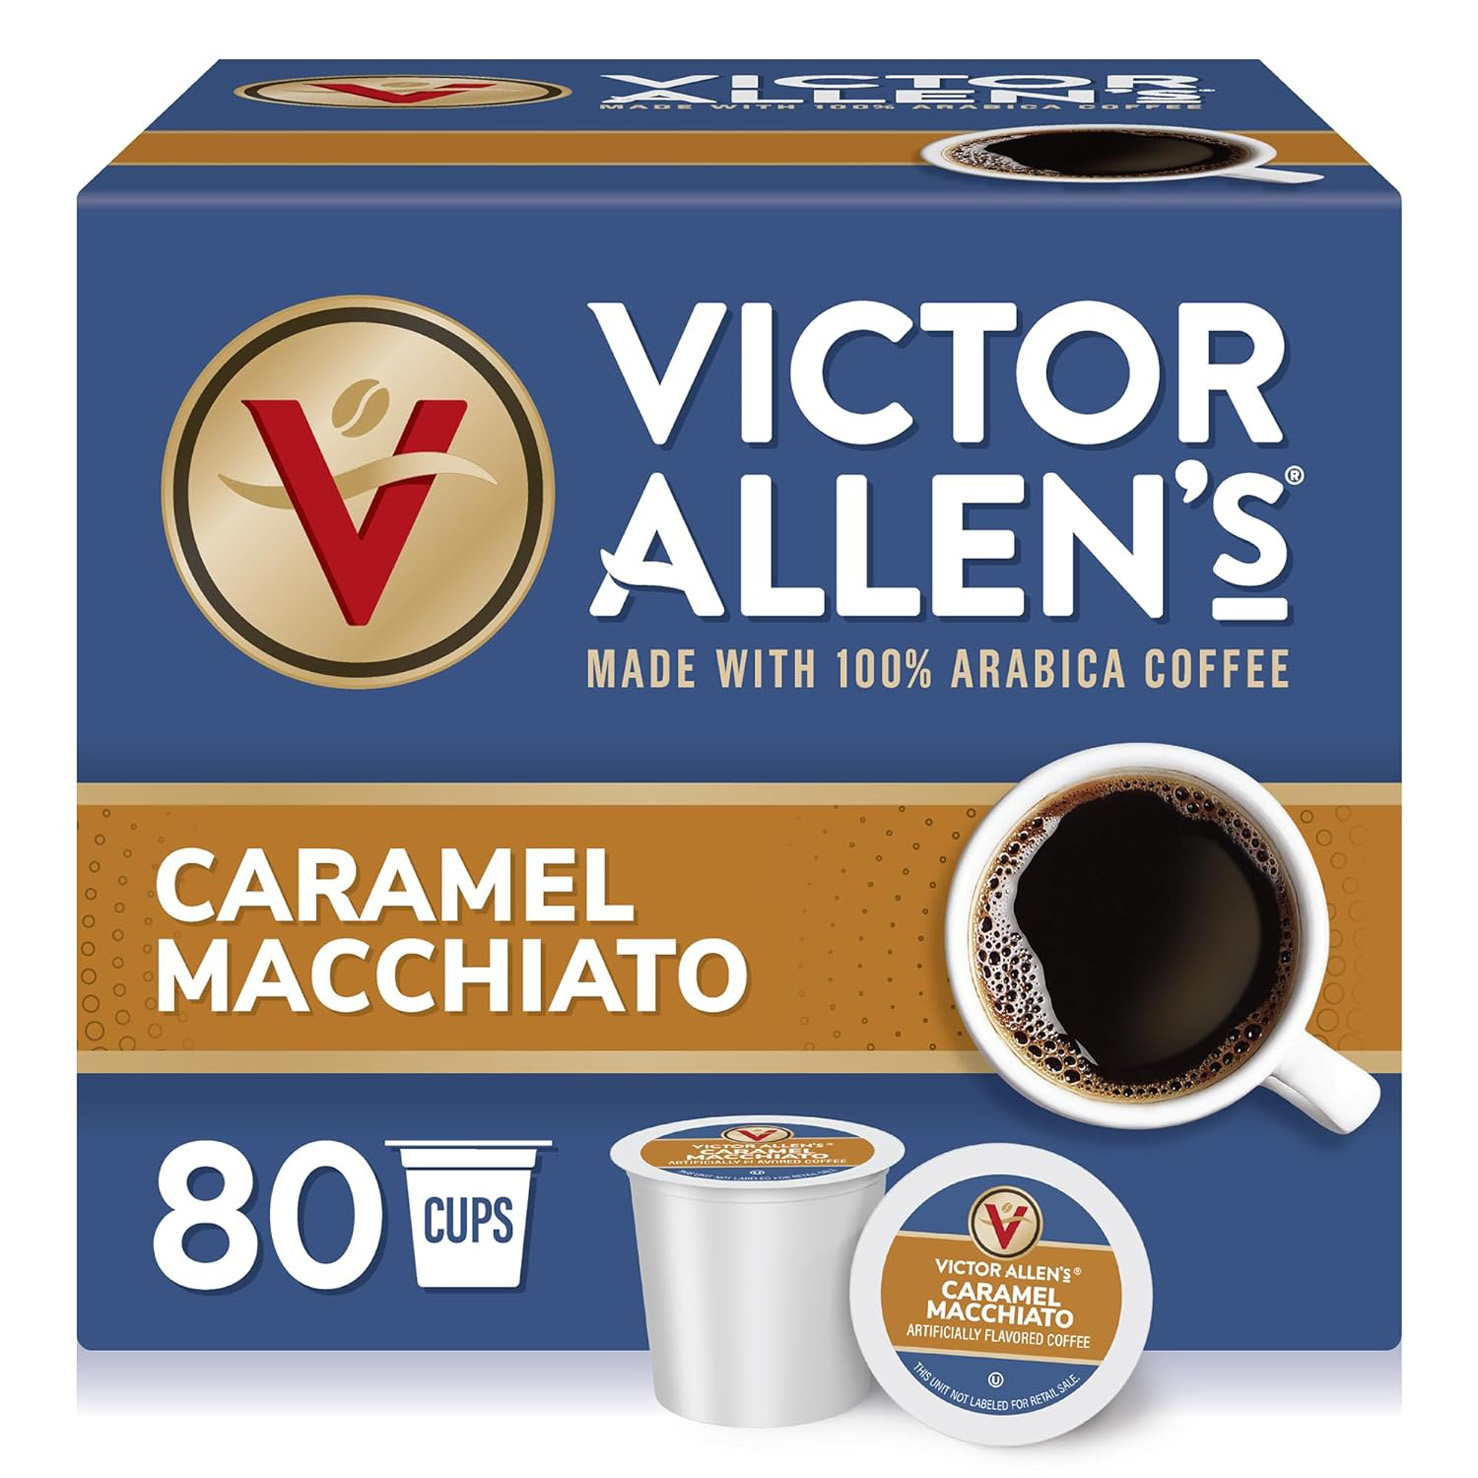 Victor Allen Coffee Caramel Macchiato Single Serve K-cup, 80 Count (Compatible with 2.0 Keurig Brewers) (Packaging May Vary)